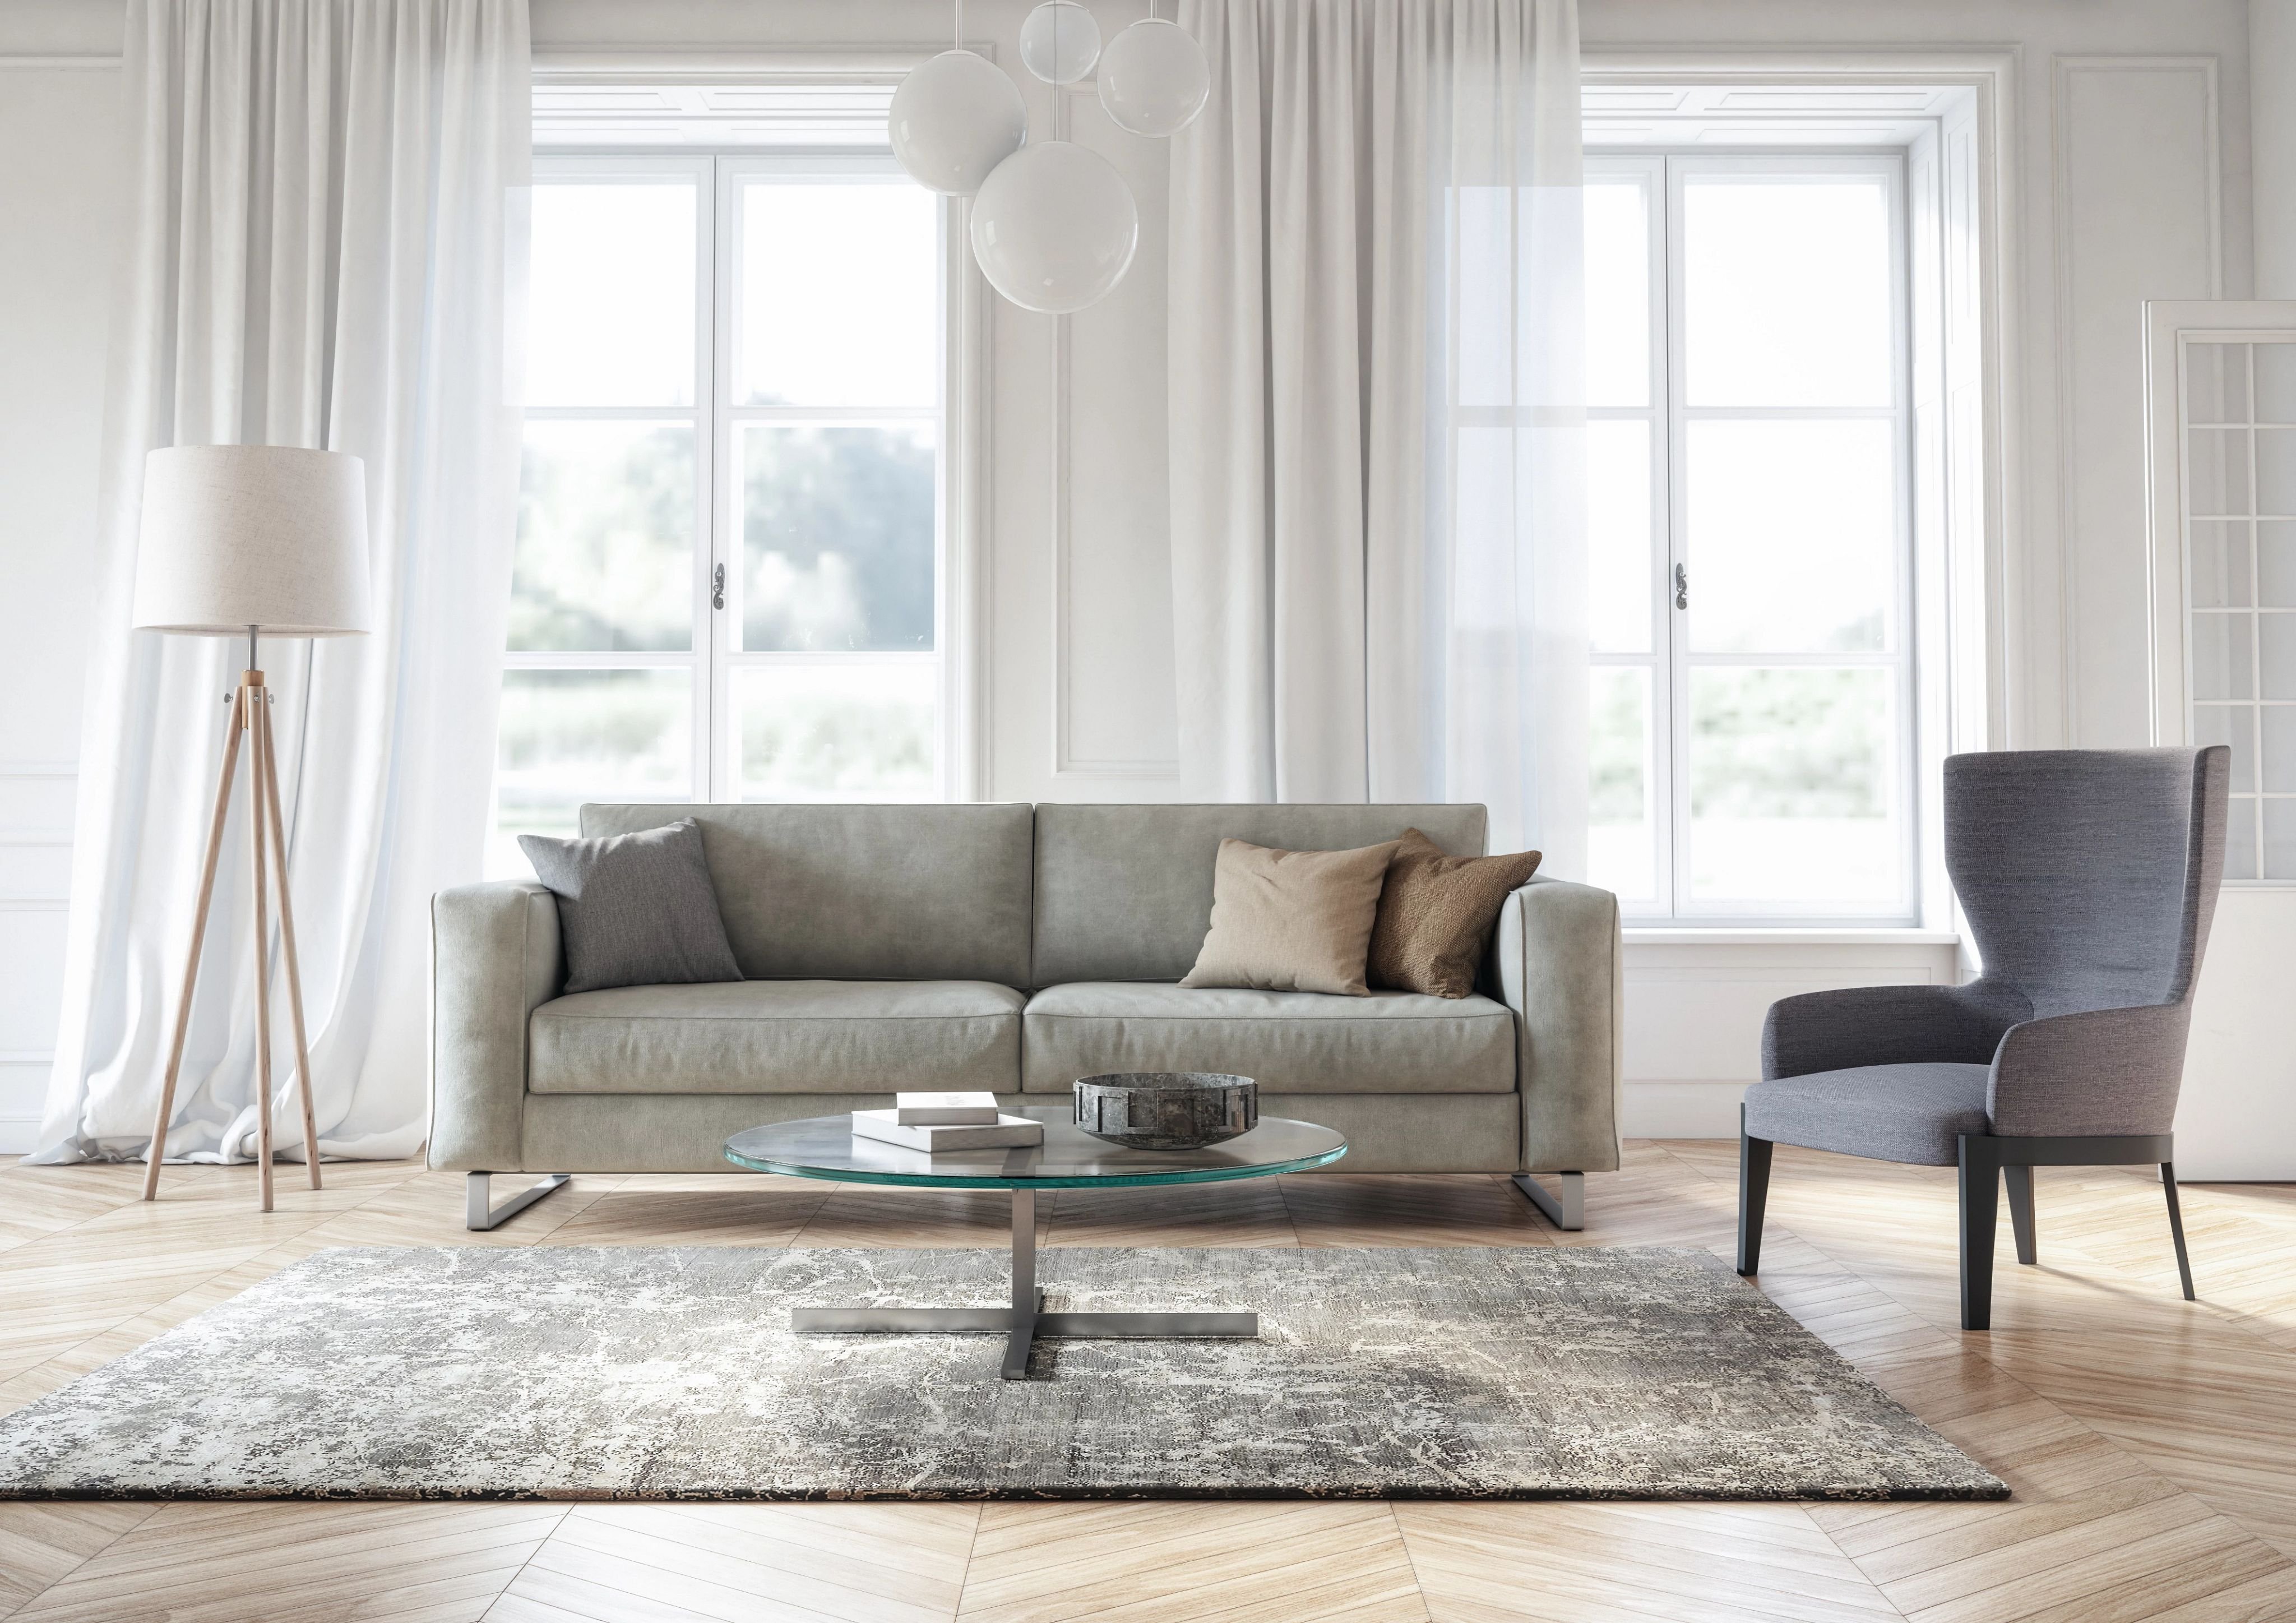 Grey sofa and chair in living room with coffee table and large window